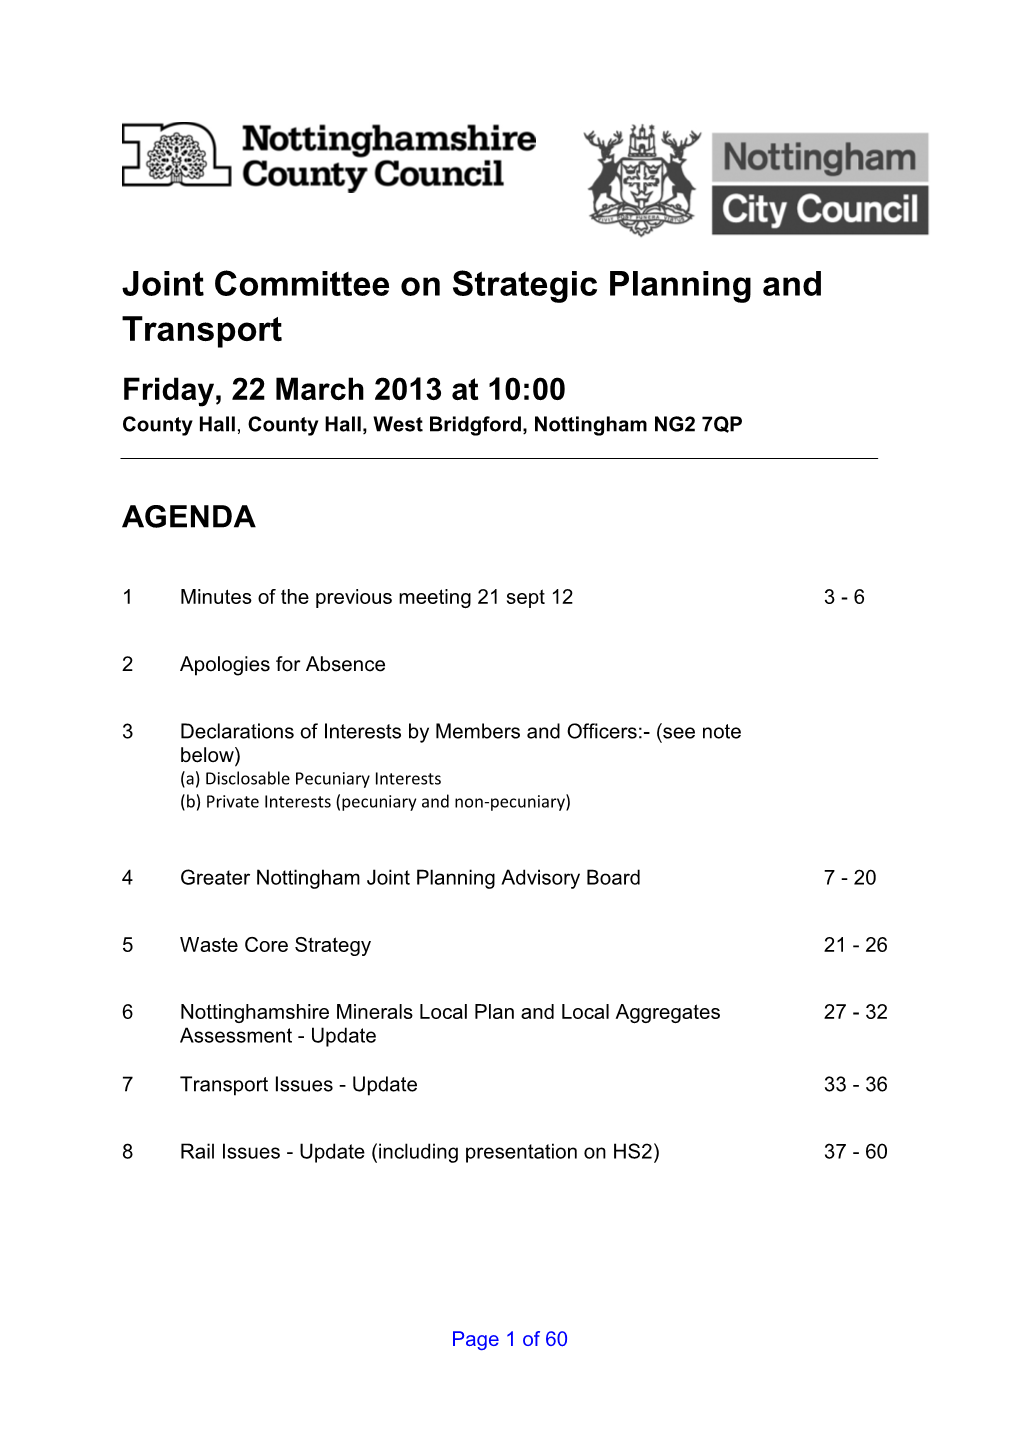 Joint Committee on Strategic Planning and Transport Friday, 22 March 2013 at 10:00 County Hall , County Hall, West Bridgford, Nottingham NG2 7QP